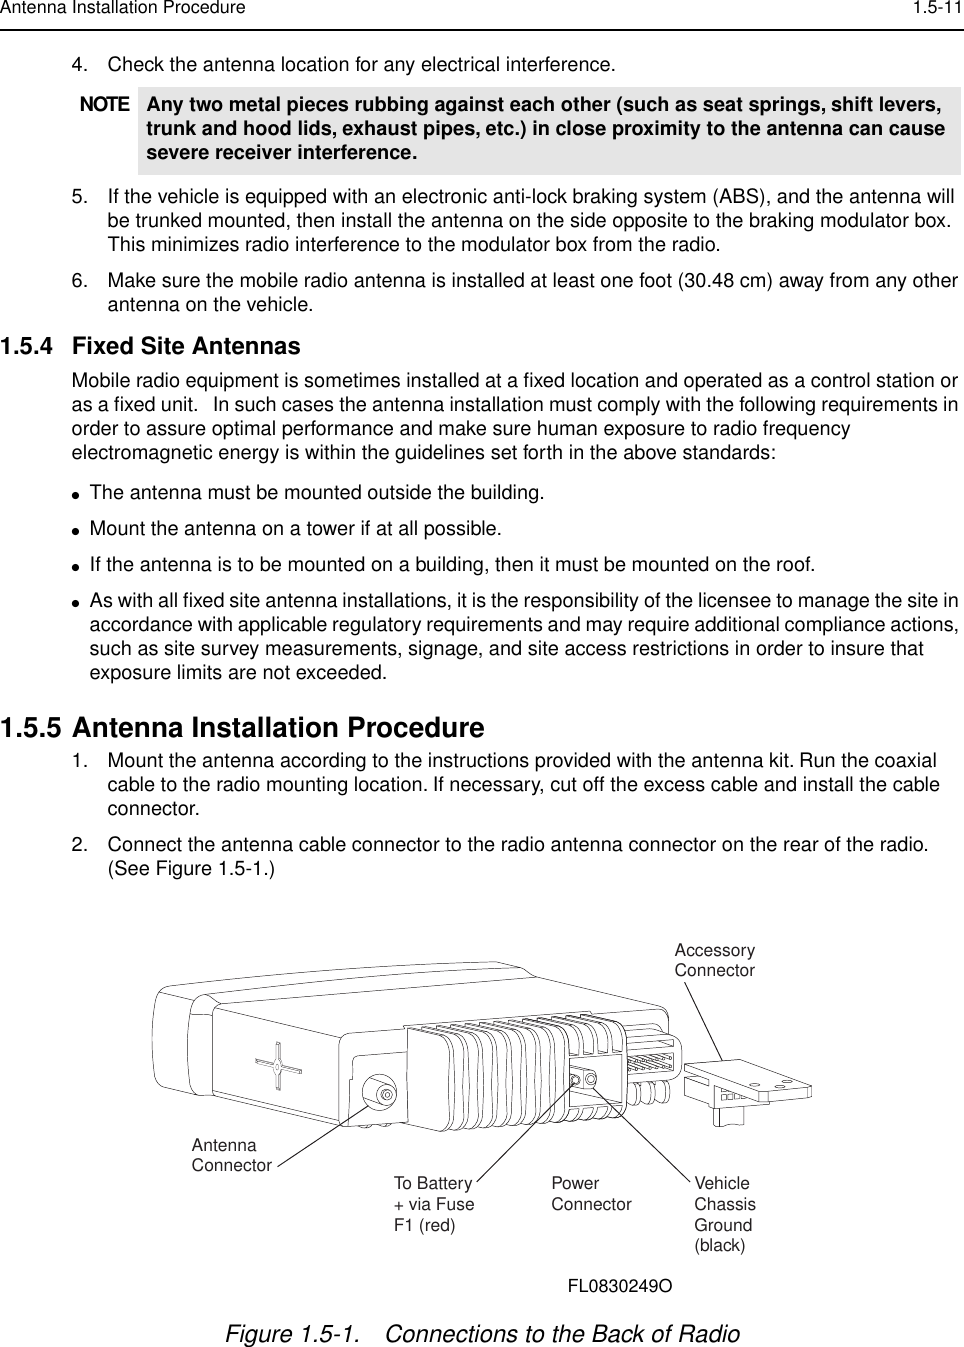  Antenna Installation Procedure 1.5-11 4. Check the antenna location for any electrical interference.5. If the vehicle is equipped with an electronic anti-lock braking system (ABS), and the antenna will be trunked mounted, then install the antenna on the side opposite to the braking modulator box. This minimizes radio interference to the modulator box from the radio.6. Make sure the mobile radio antenna is installed at least one foot (30.48 cm) away from any other antenna on the vehicle. 1.5.4 Fixed Site Antennas Mobile radio equipment is sometimes installed at a ﬁxed location and operated as a control station or as a ﬁxed unit.   In such cases the antenna installation must comply with the following requirements in order to assure optimal performance and make sure human exposure to radio frequency electromagnetic energy is within the guidelines set forth in the above standards: ● The antenna must be mounted outside the building.  ● Mount the antenna on a tower if at all possible.  ● If the antenna is to be mounted on a building, then it must be mounted on the roof. ● As with all ﬁxed site antenna installations, it is the responsibility of the licensee to manage the site in accordance with applicable regulatory requirements and may require additional compliance actions, such as site survey measurements, signage, and site access restrictions in order to insure that exposure limits are not exceeded. 1.5.5 Antenna Installation Procedure 1. Mount the antenna according to the instructions provided with the antenna kit. Run the coaxial cable to the radio mounting location. If necessary, cut off the excess cable and install the cable connector.2. Connect the antenna cable connector to the radio antenna connector on the rear of the radio. (See Figure 1.5-1.) NOTE Any two metal pieces rubbing against each other (such as seat springs, shift levers, trunk and hood lids, exhaust pipes, etc.) in close proximity to the antenna can cause severe receiver interference. Figure 1.5-1. Connections to the Back of RadioAntenna Connector To Battery+ via FuseF1 (red)PowerConnector VehicleChassisGround(black)AccessoryConnectorFL0830249O